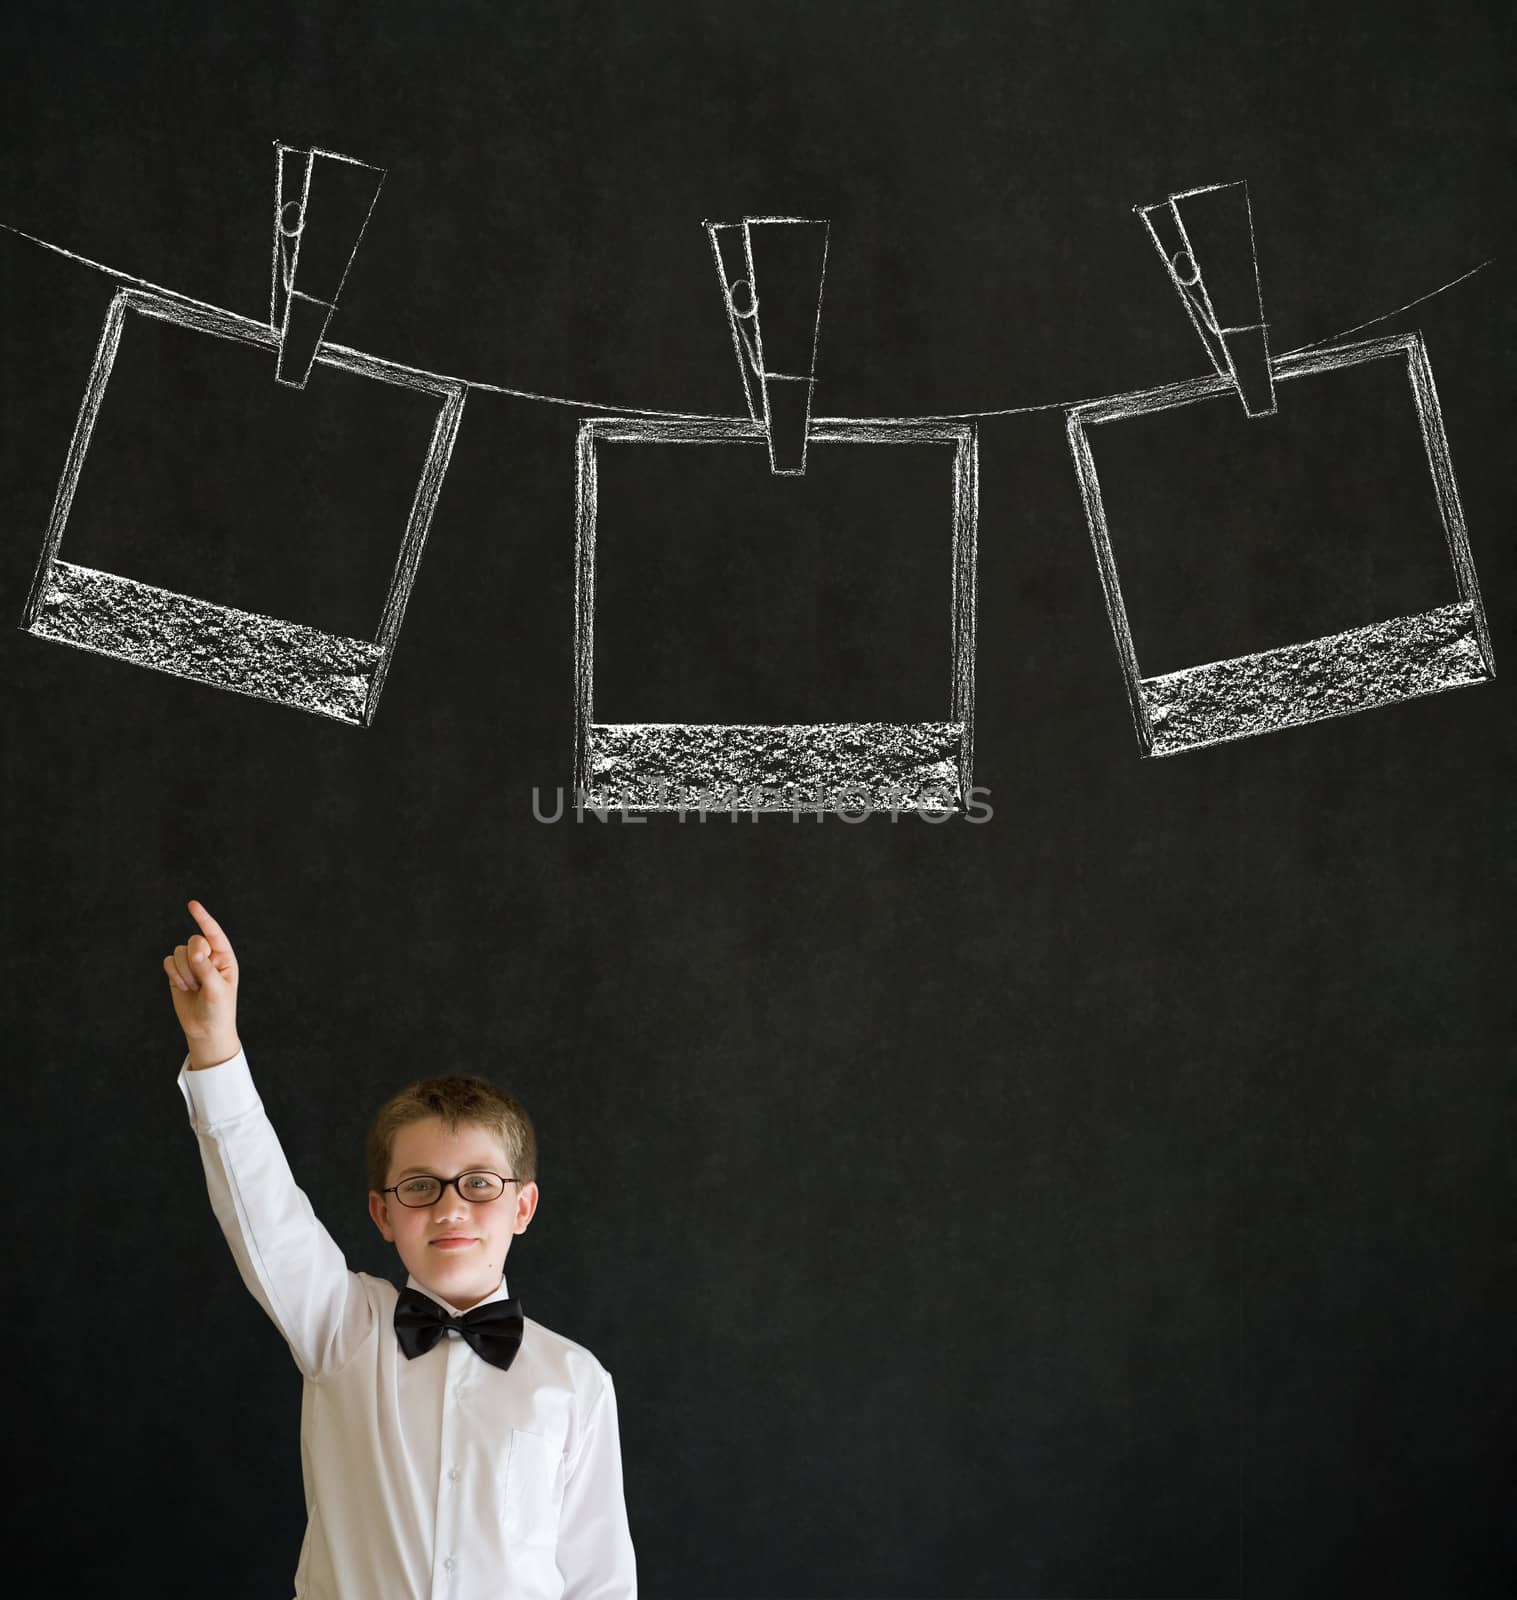 Hand up answer boy dressed up as business man with hanging instant photograph on blackboard background